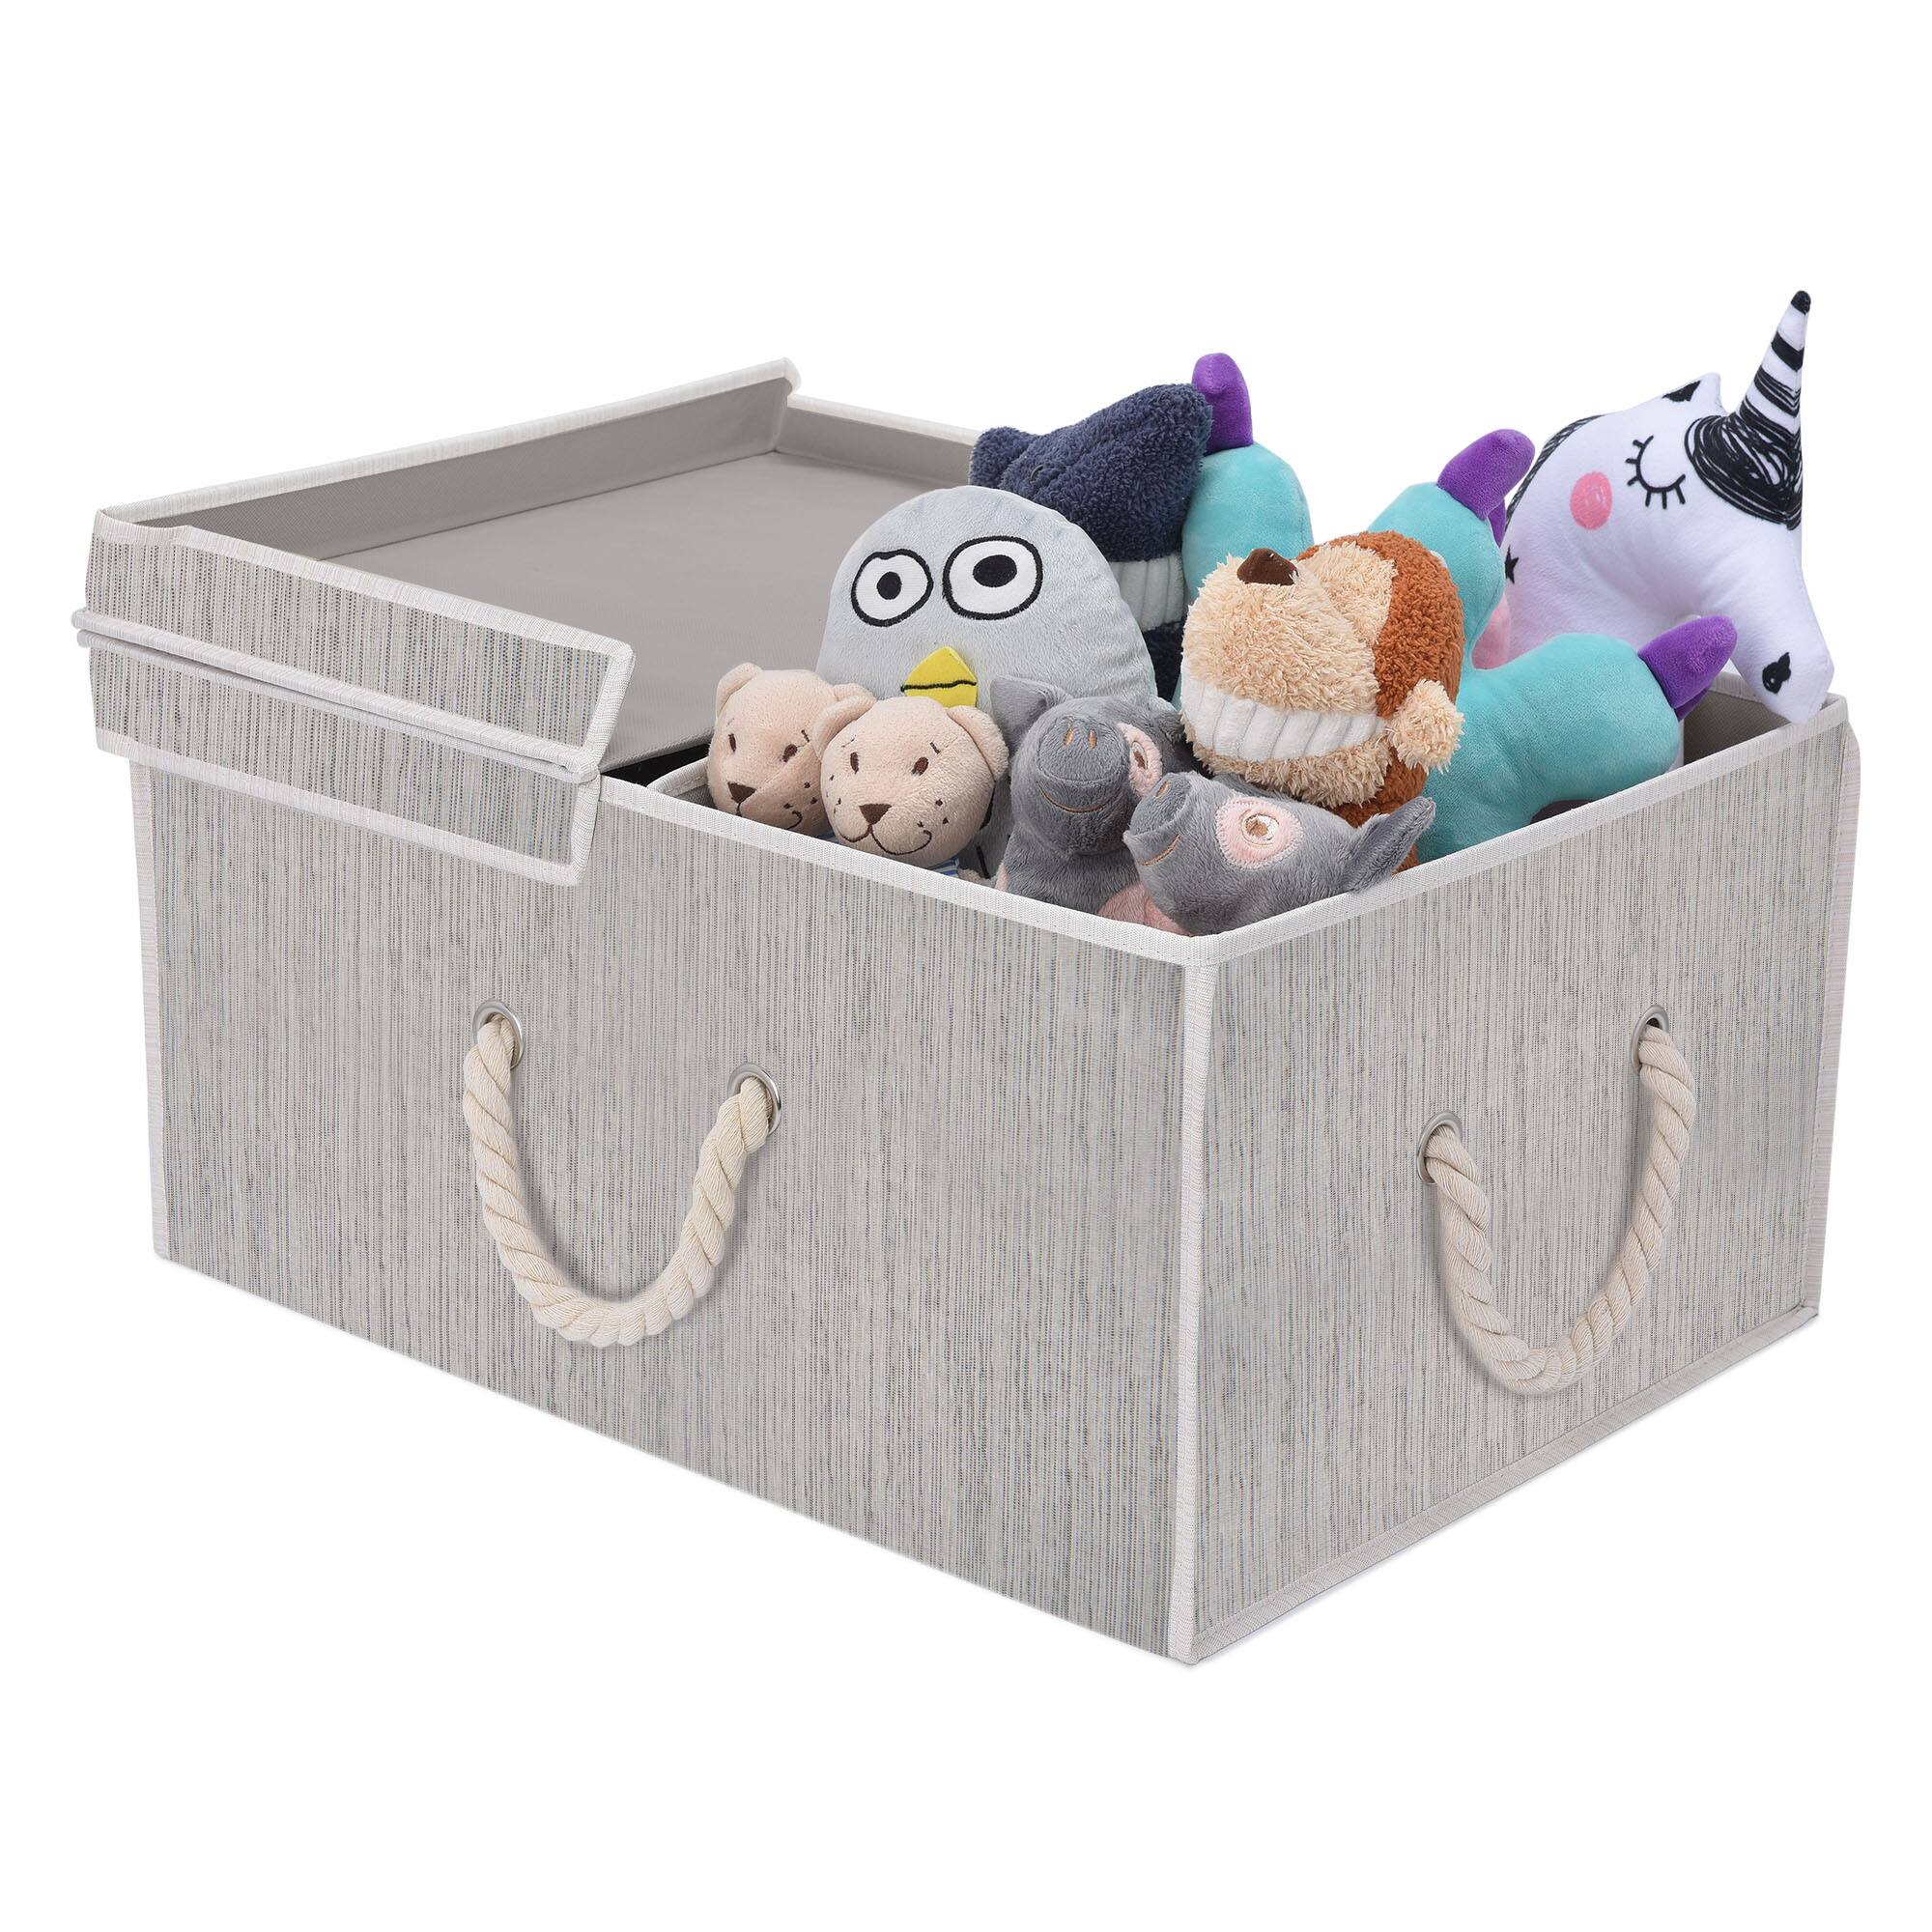 StorageWorks 65L Storage Bin with Double-Open Lid and Strong Cotton Rope Handle (Gray, Brown & Beige, Bamboo Style) Jumbo Size for $17.99 + Free Shipping w/ Amazon Prime or $25+